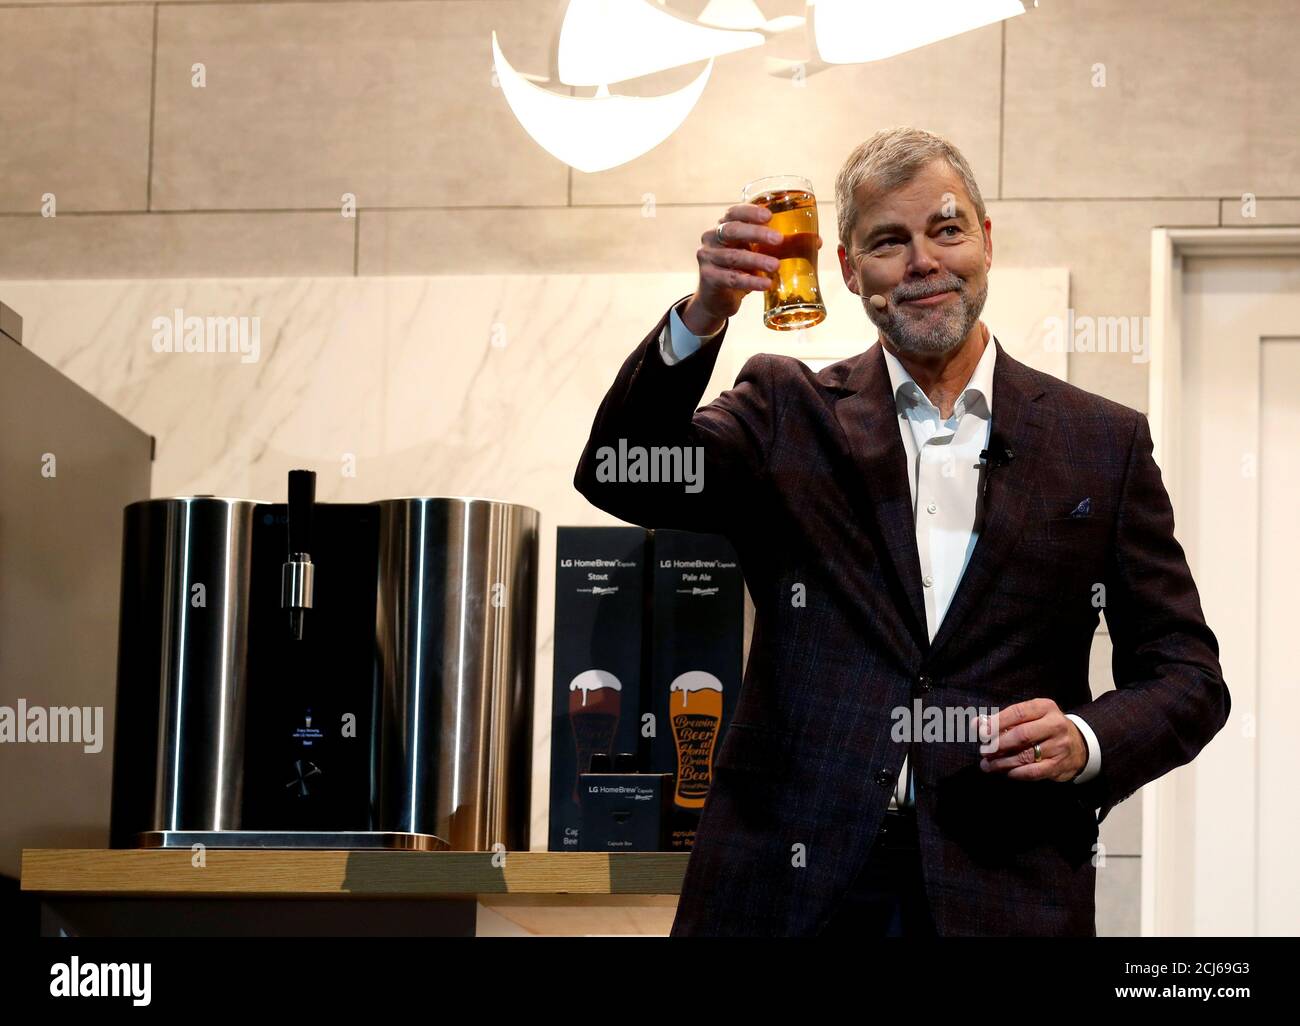 David Vanderwaal, senior vice president of marketing for LG Electronics USA, introduces the LG HomeBrew, an automated, home beer-making appliance, during an LG Electronics news conference at the 2019 CES in Las Vegas, Nevada, U.S. January 7, 2019. REUTERS/Steve Marcus Stock Photo